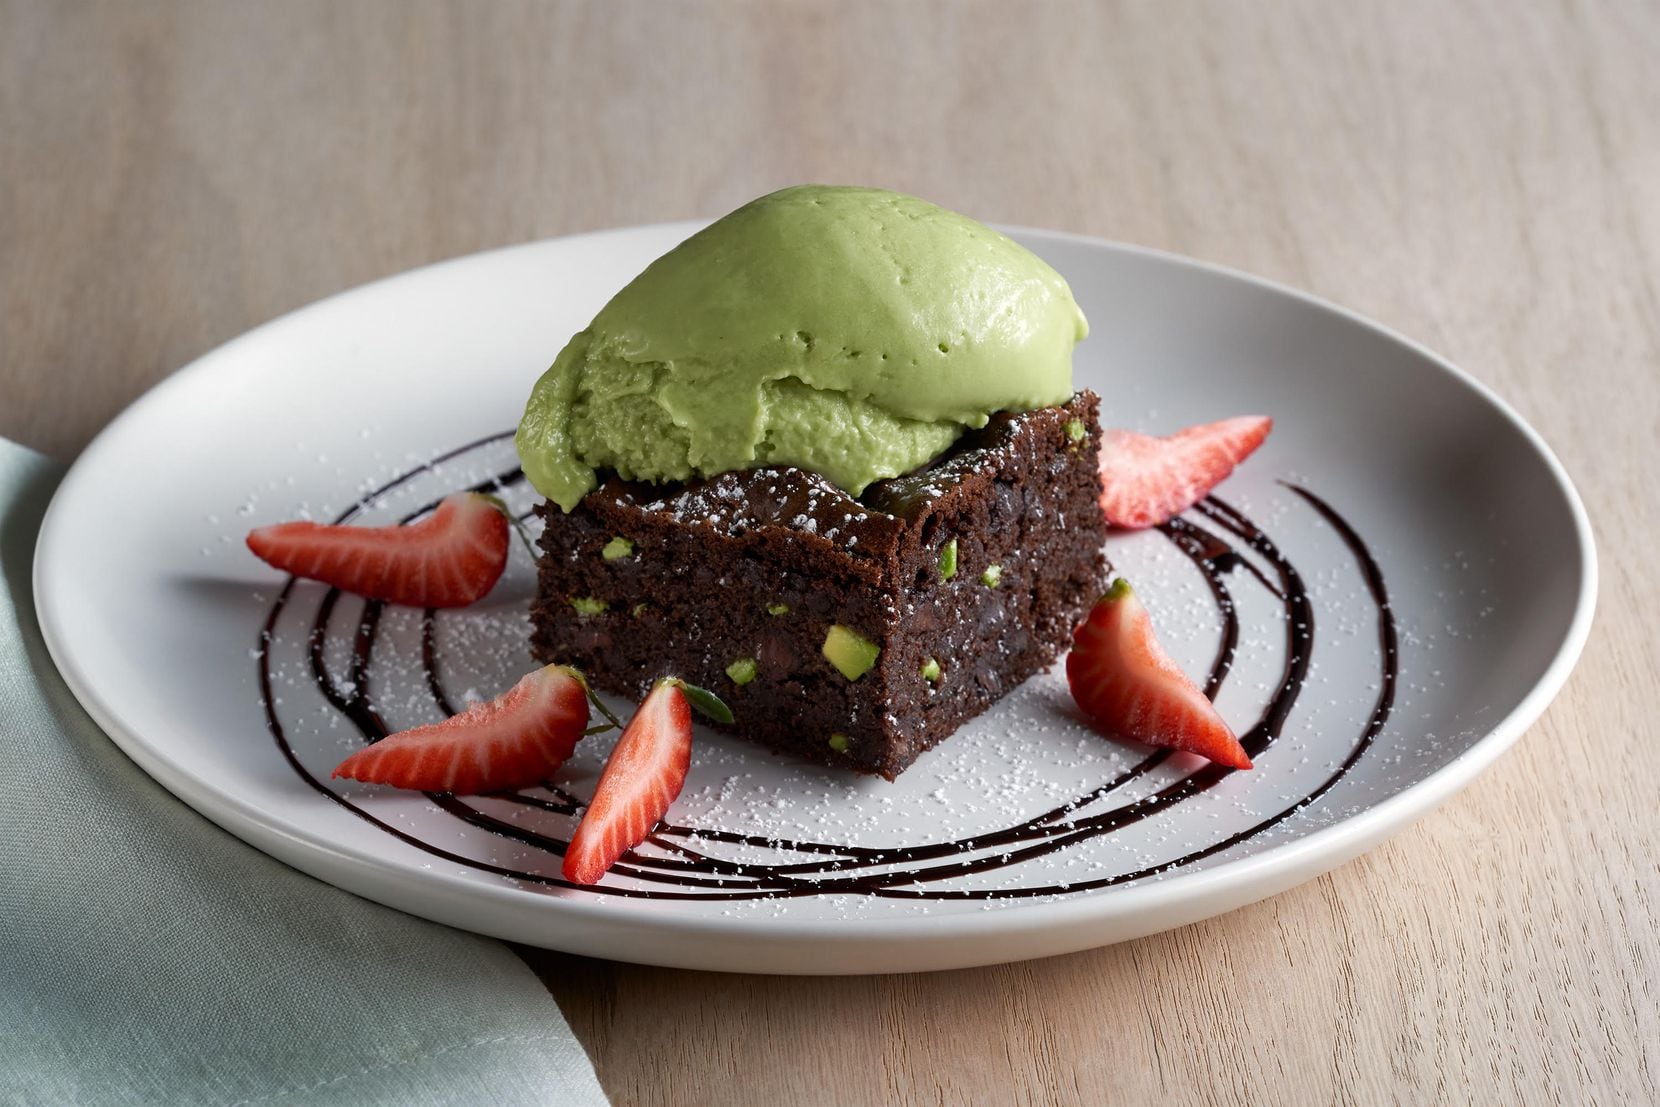 AvoEatery, an avocado-focused restaurant from the team behind Avocados From Mexico, is expected to open in Trinity Groves in January 2020. One of the items on the menu is a Brownie A-la Cado: an avocado brownie served with avocado vanilla ice cream. 